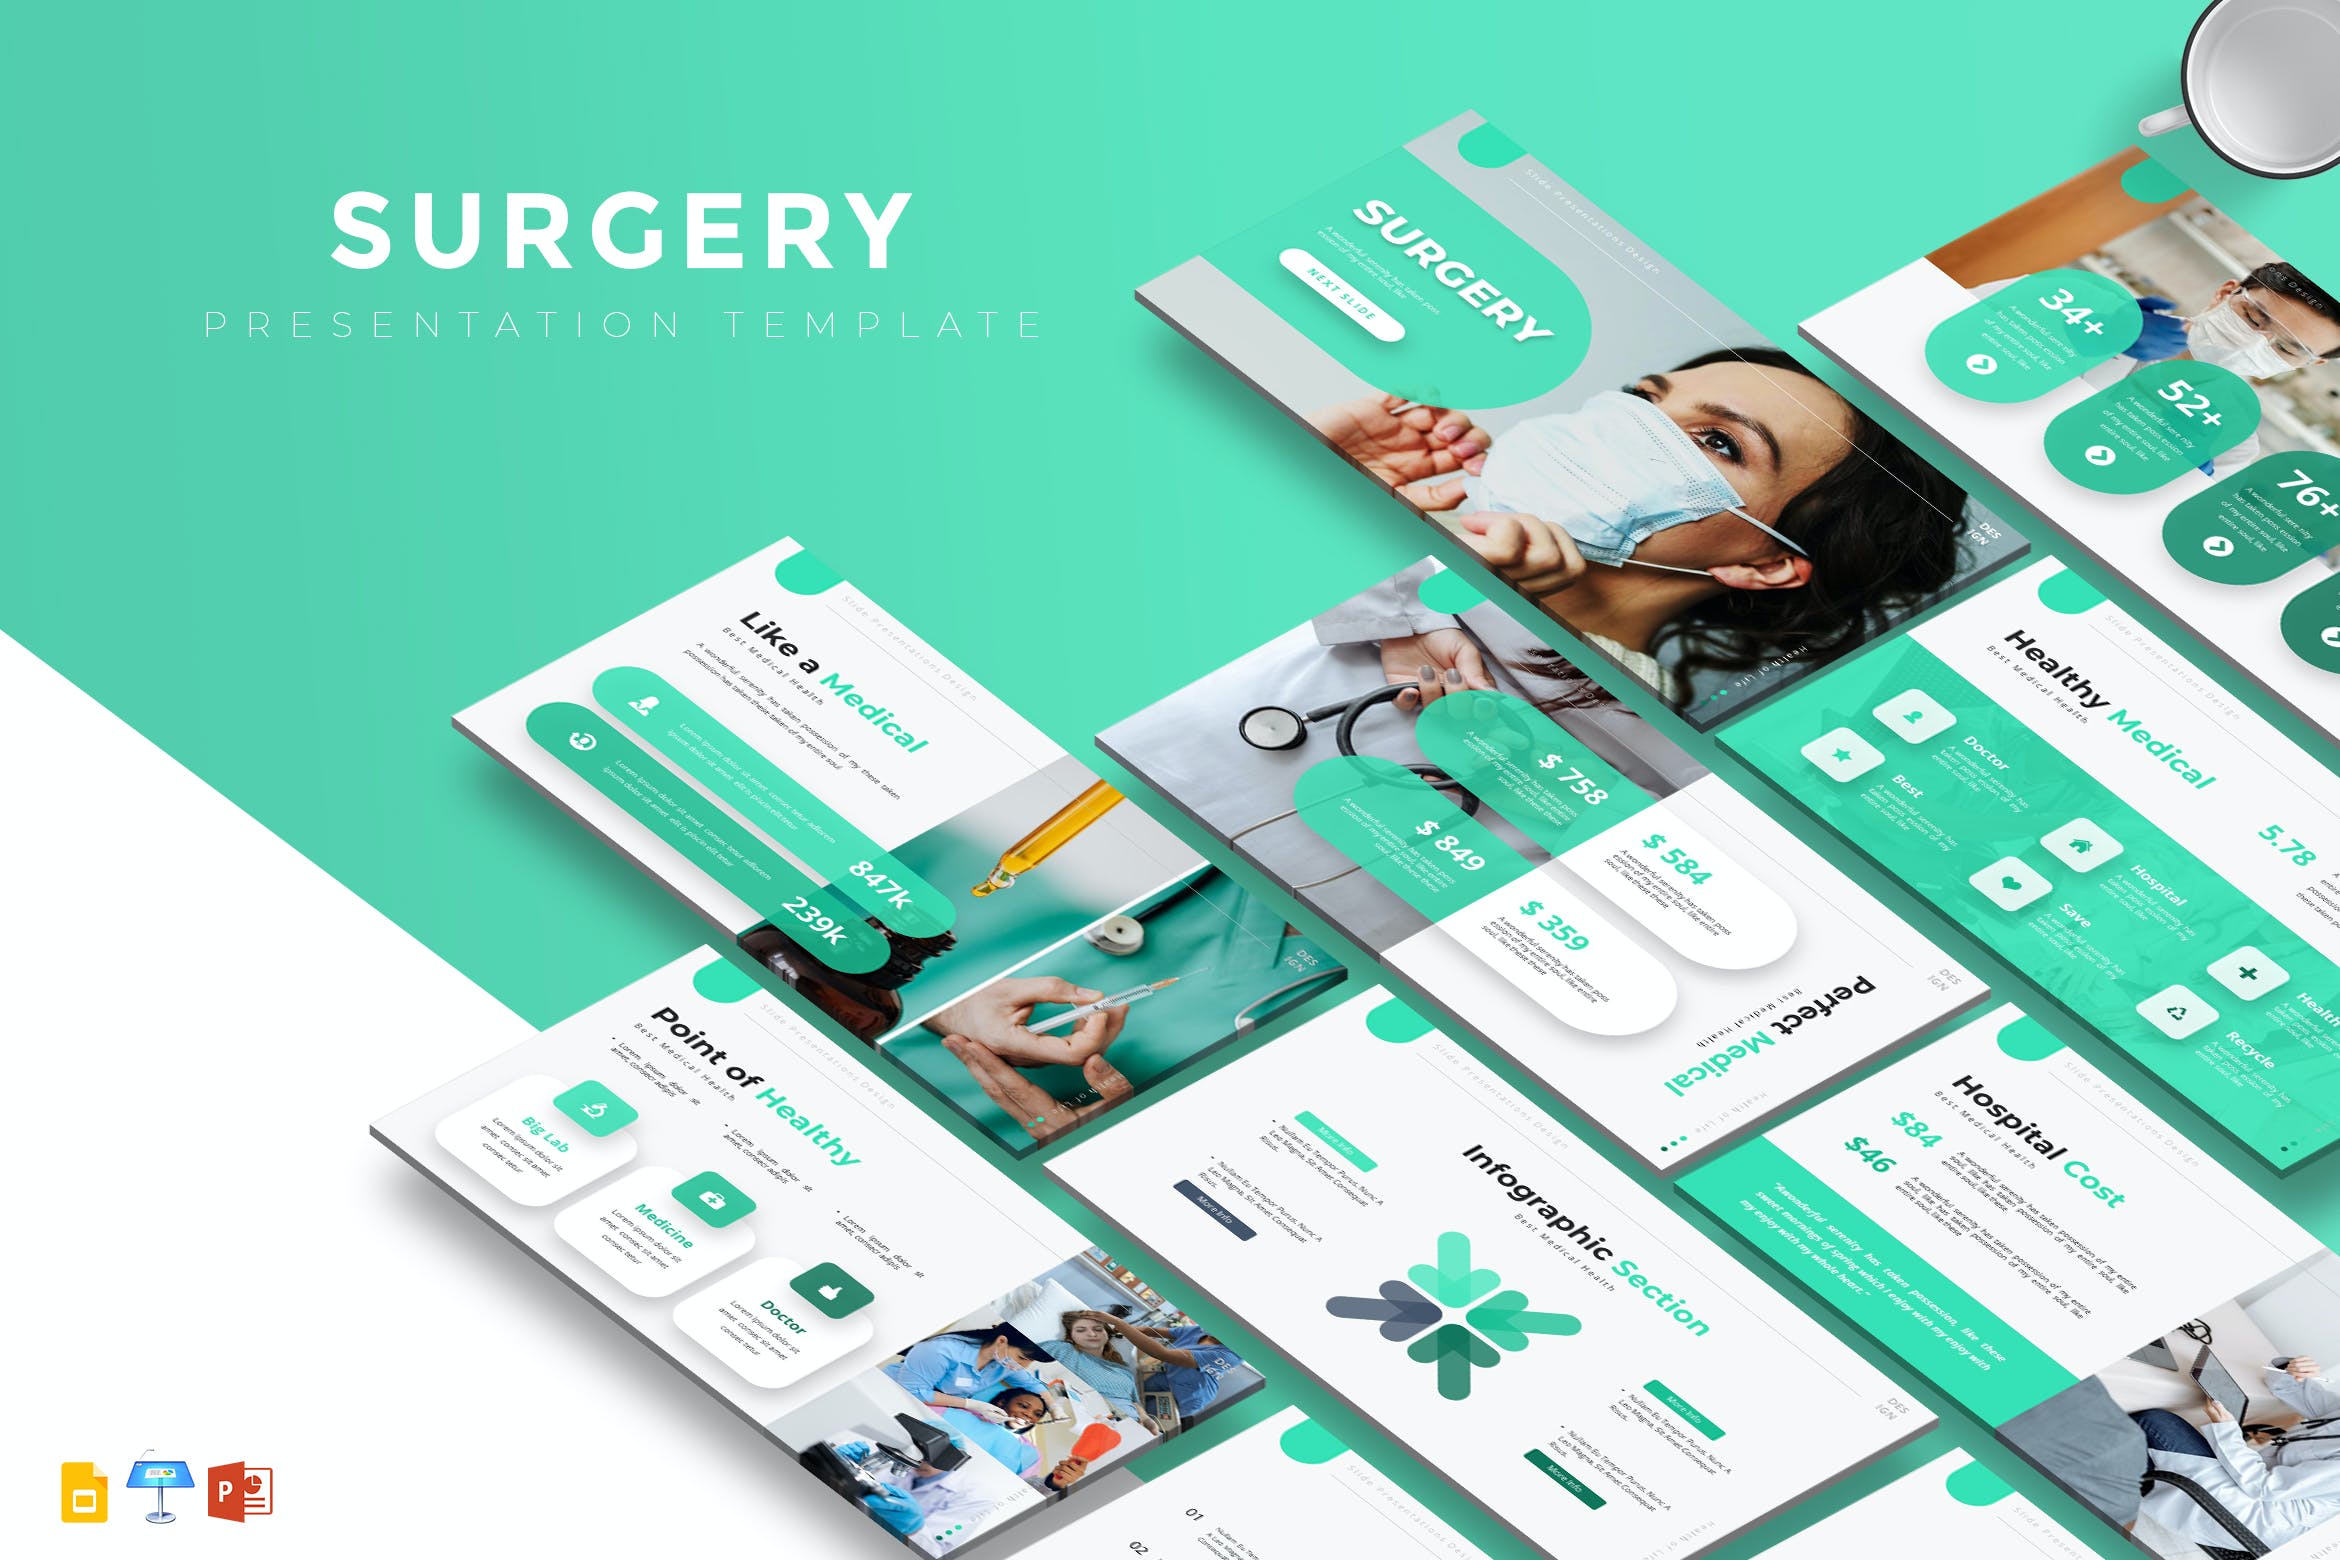 Cover image of Surgery - Presentation Template.